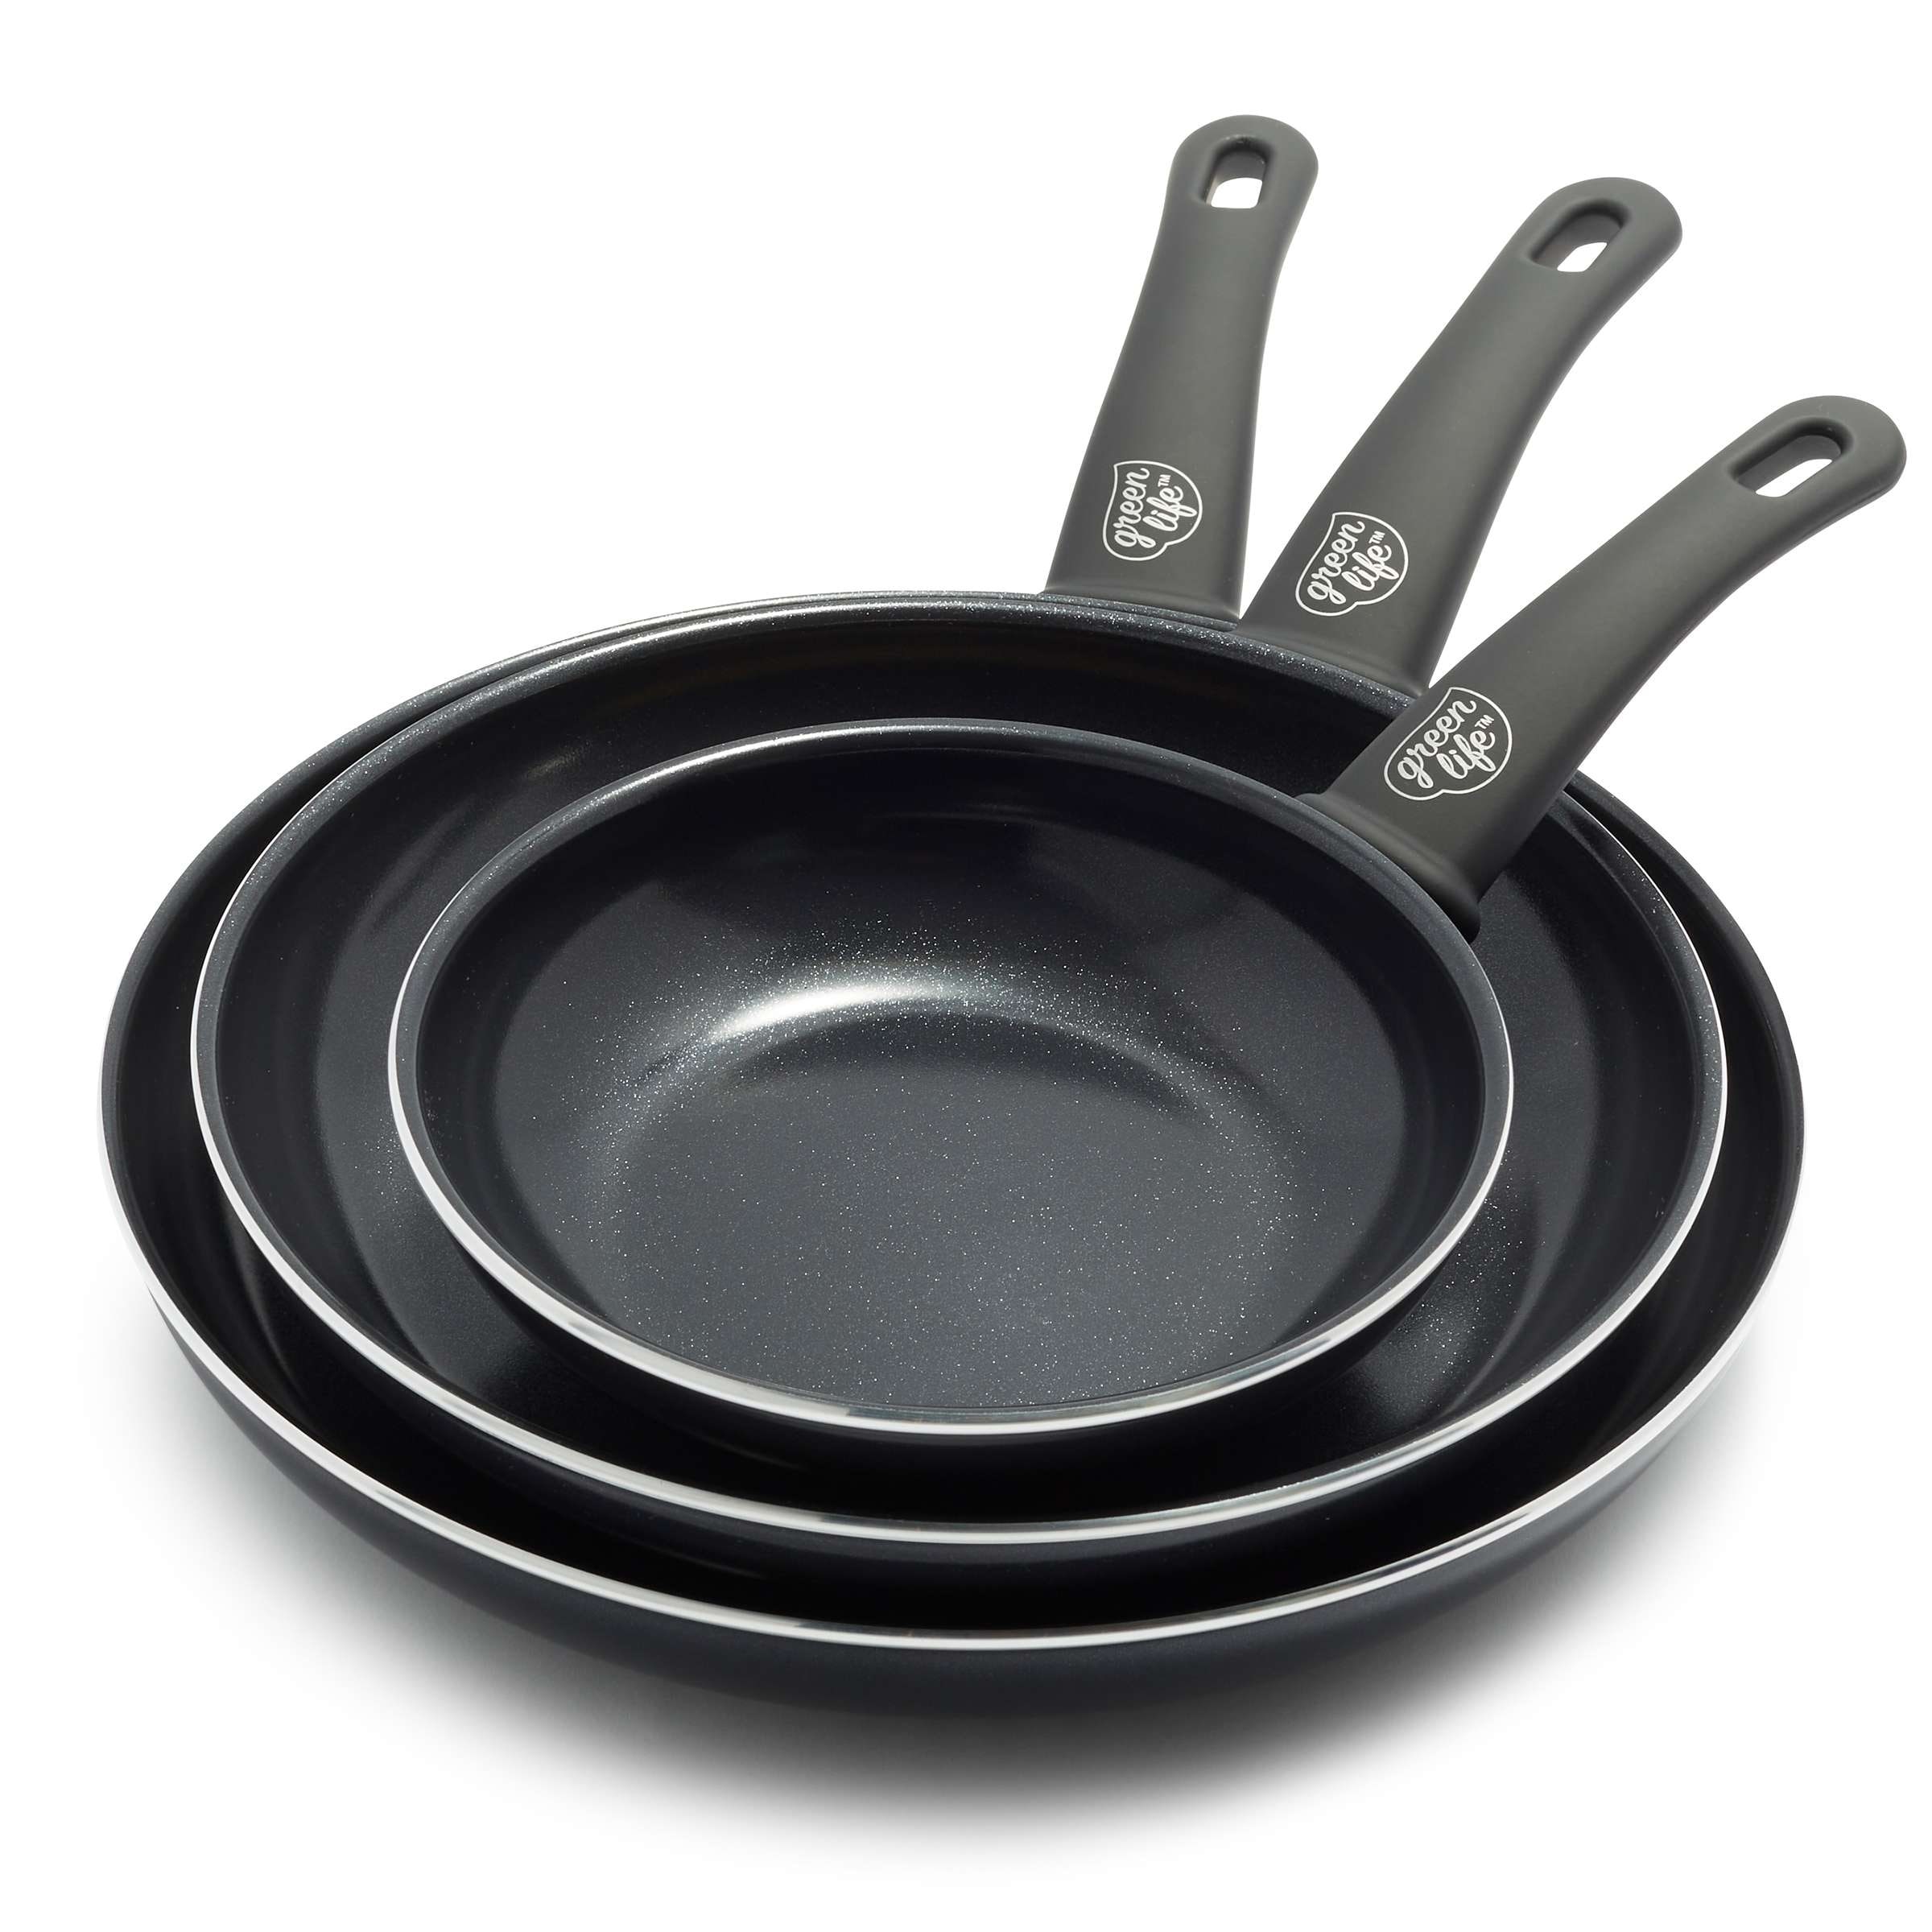 https://ak1.ostkcdn.com/images/products/is/images/direct/ac9f88fa4465942c6efefbc2a4995299d1e0018f/GreenLife-Soft-Grip-3pc-Frying-Pan-Set-%288%22%2C-10%22-%26-12%22%29.jpg